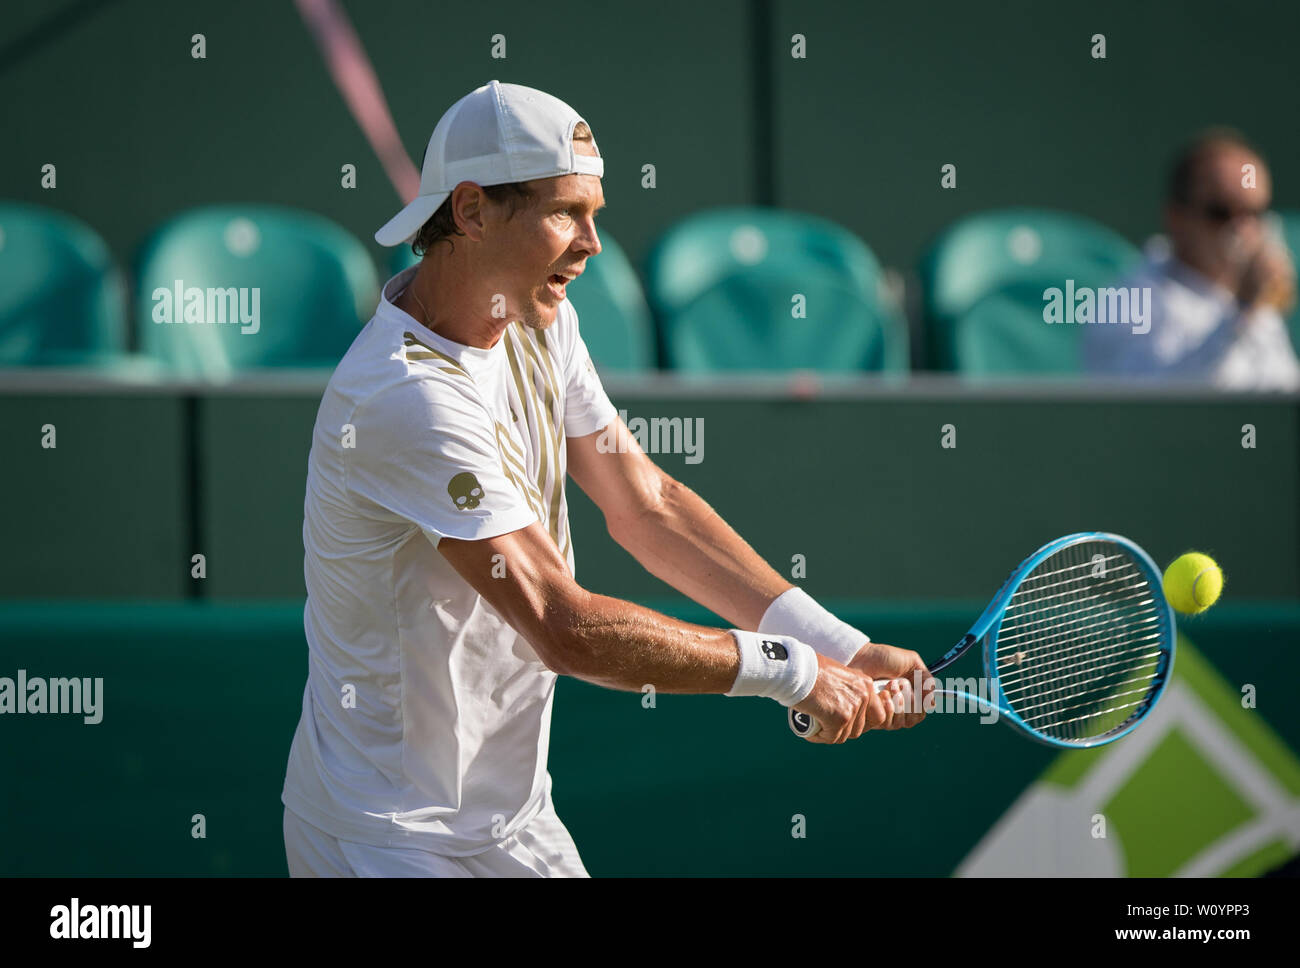 Slough, UK. 28th June, 2019. Tomáš Berdych (CZE) during The Boodles tennis  exhibition event 2019 Day 4 at Stoke Park, Slough, England on 28 June 2019.  Photo by Andy Rowland. Credit: PRiME